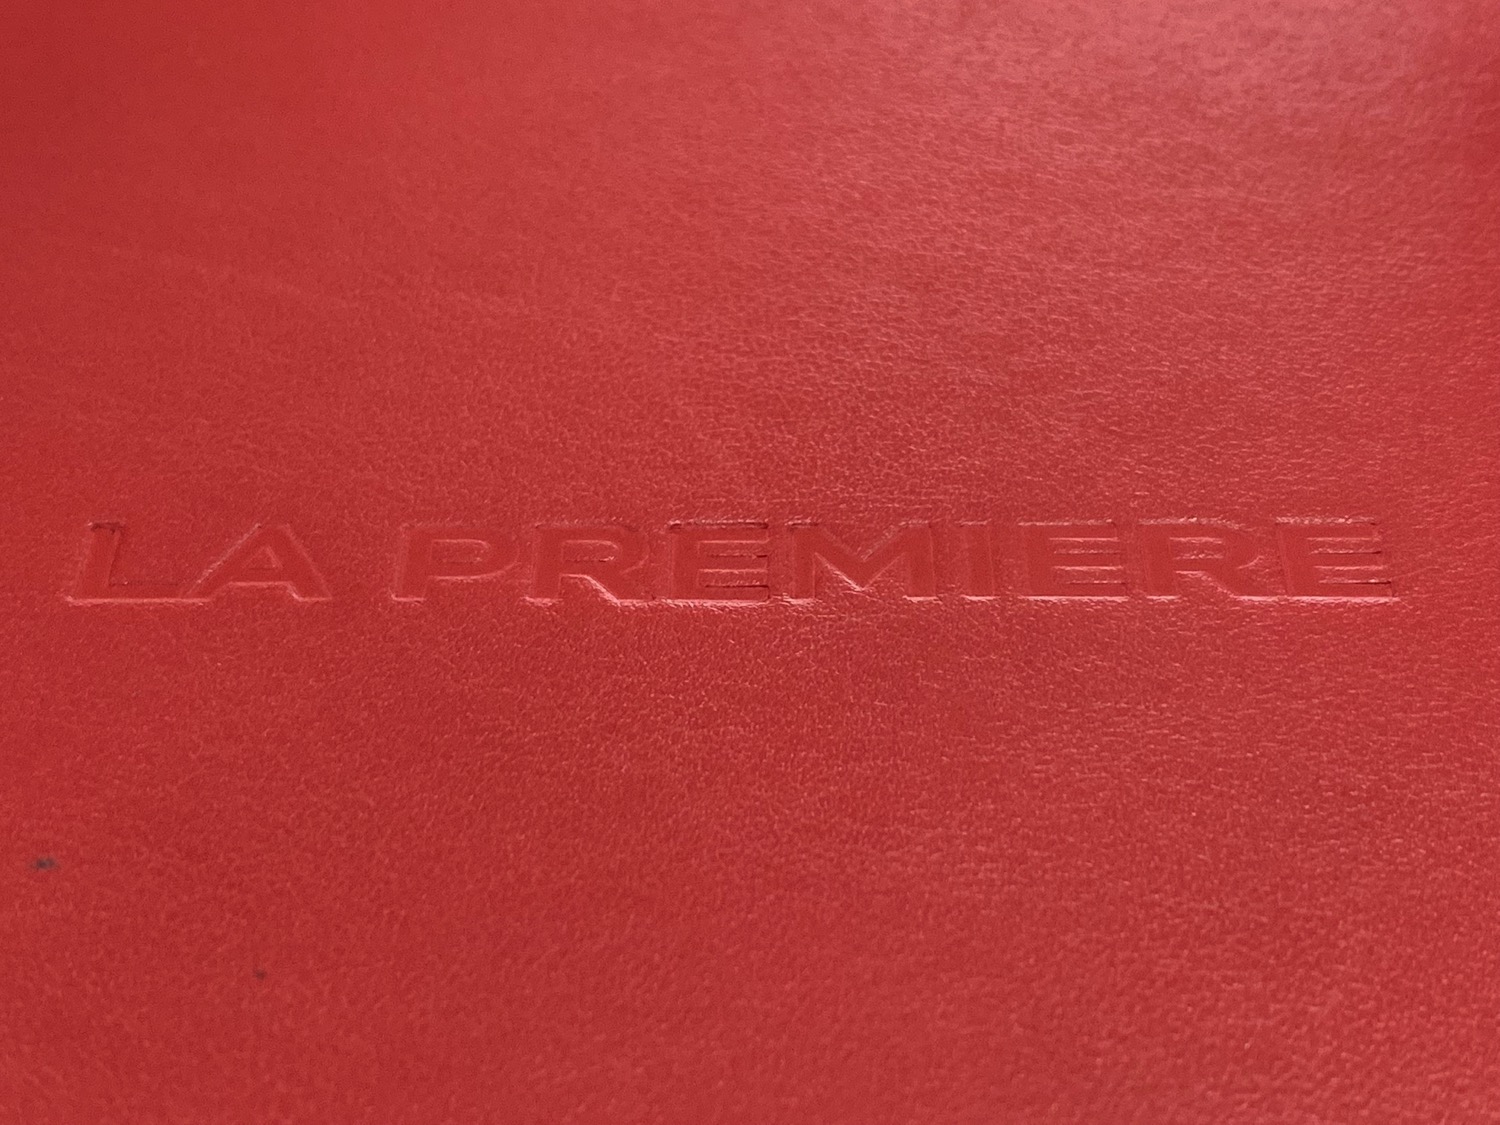 a red leather surface with text